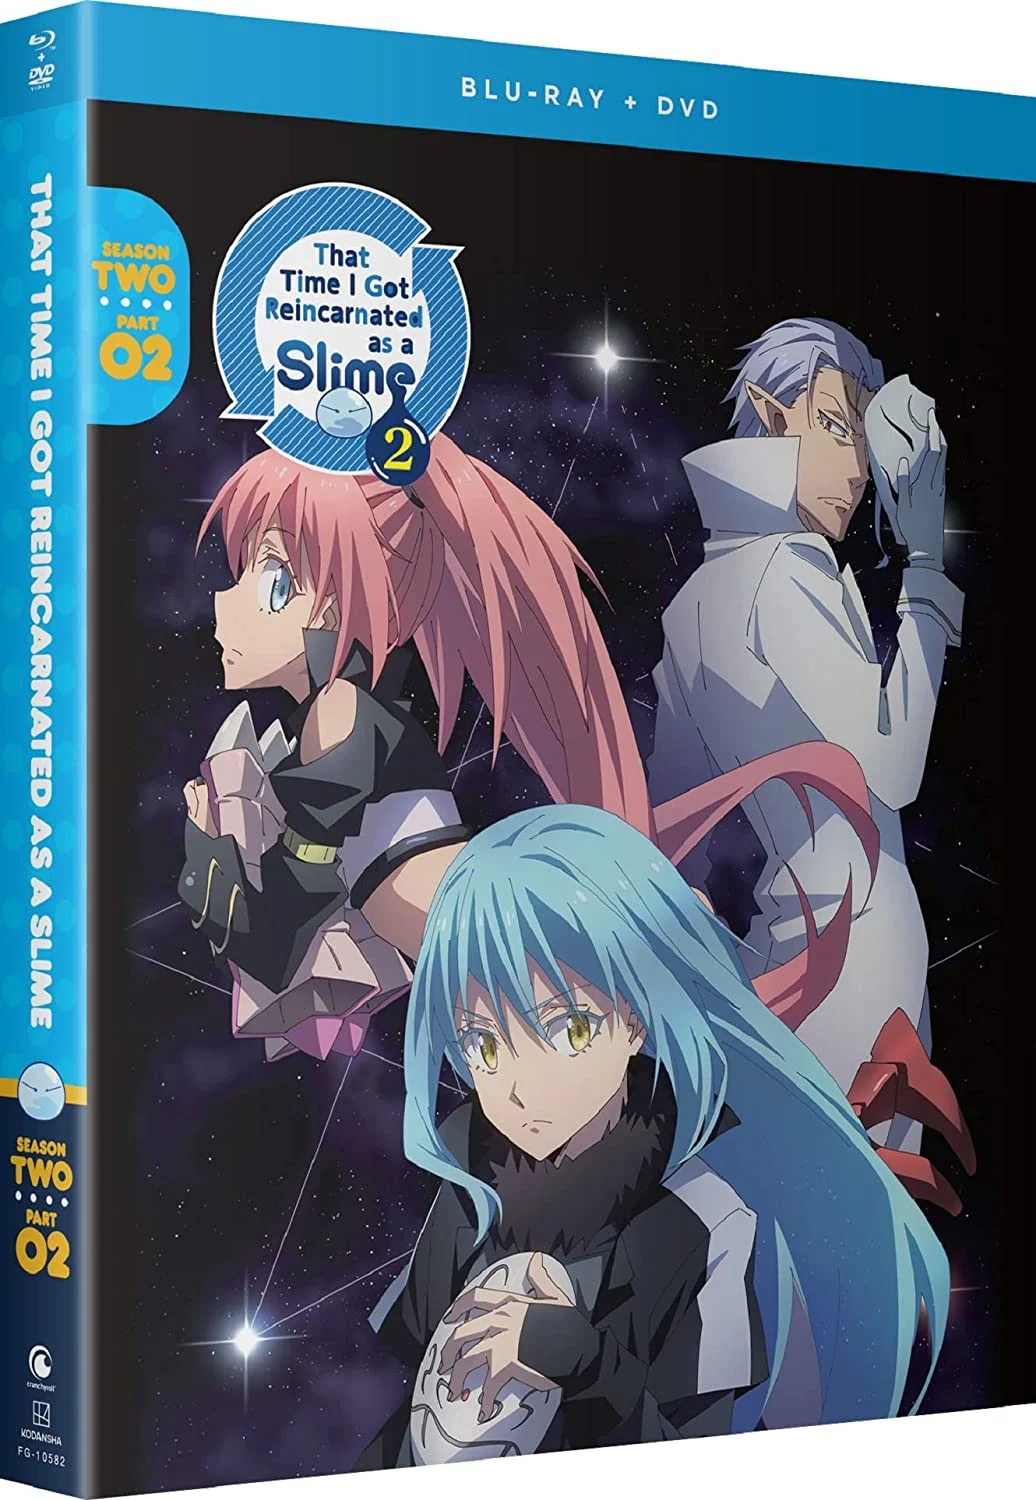 That Time I Got Reincarnated as a Slime: S2 – Part 2 (Blu-ray/DVD Combo)